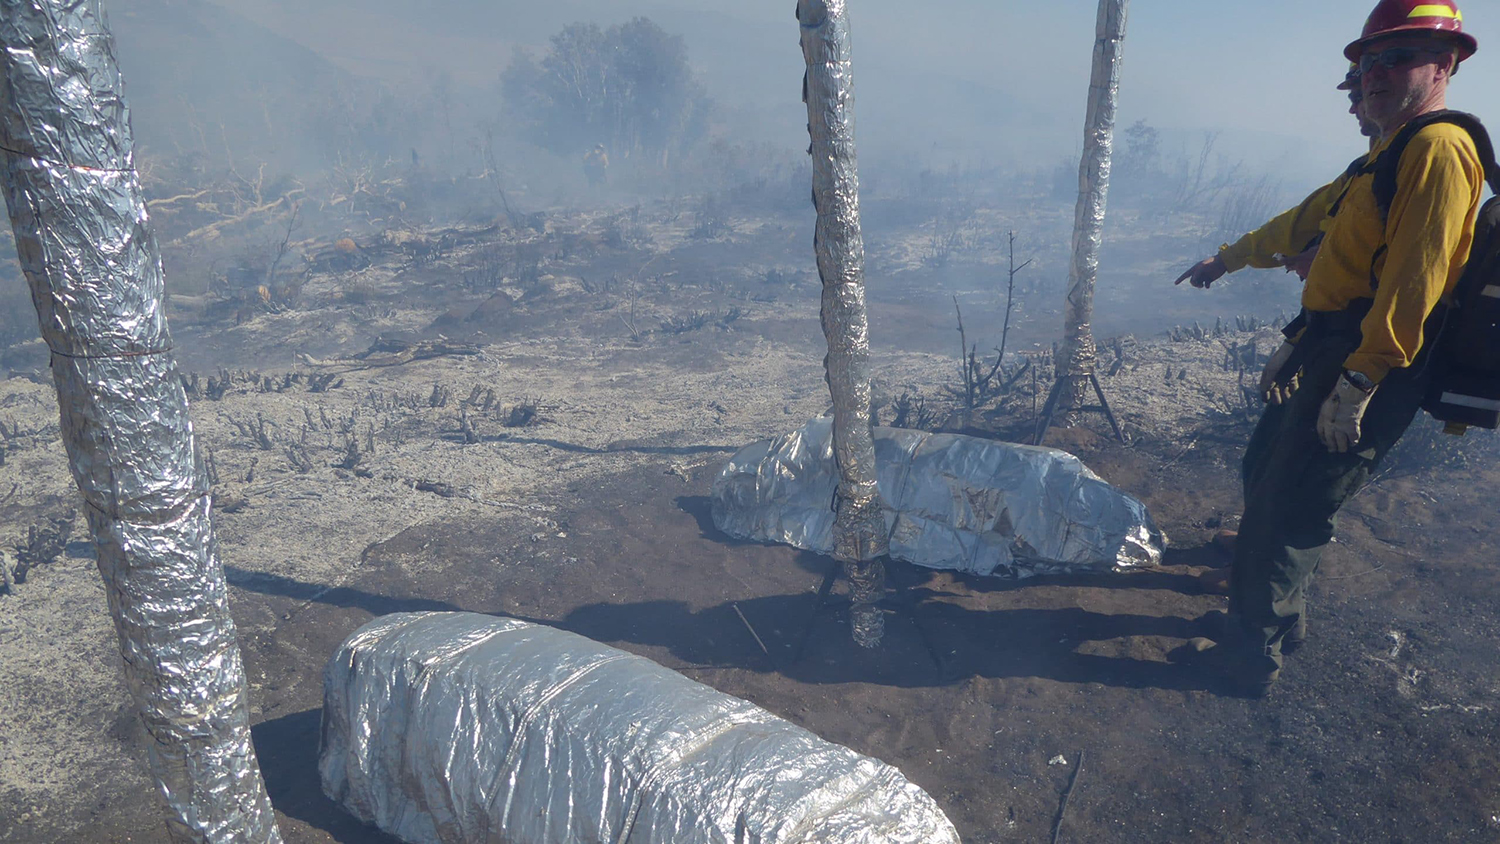 Firefighter points to two fire shelters being demonstrated in use in a burned out natural area.